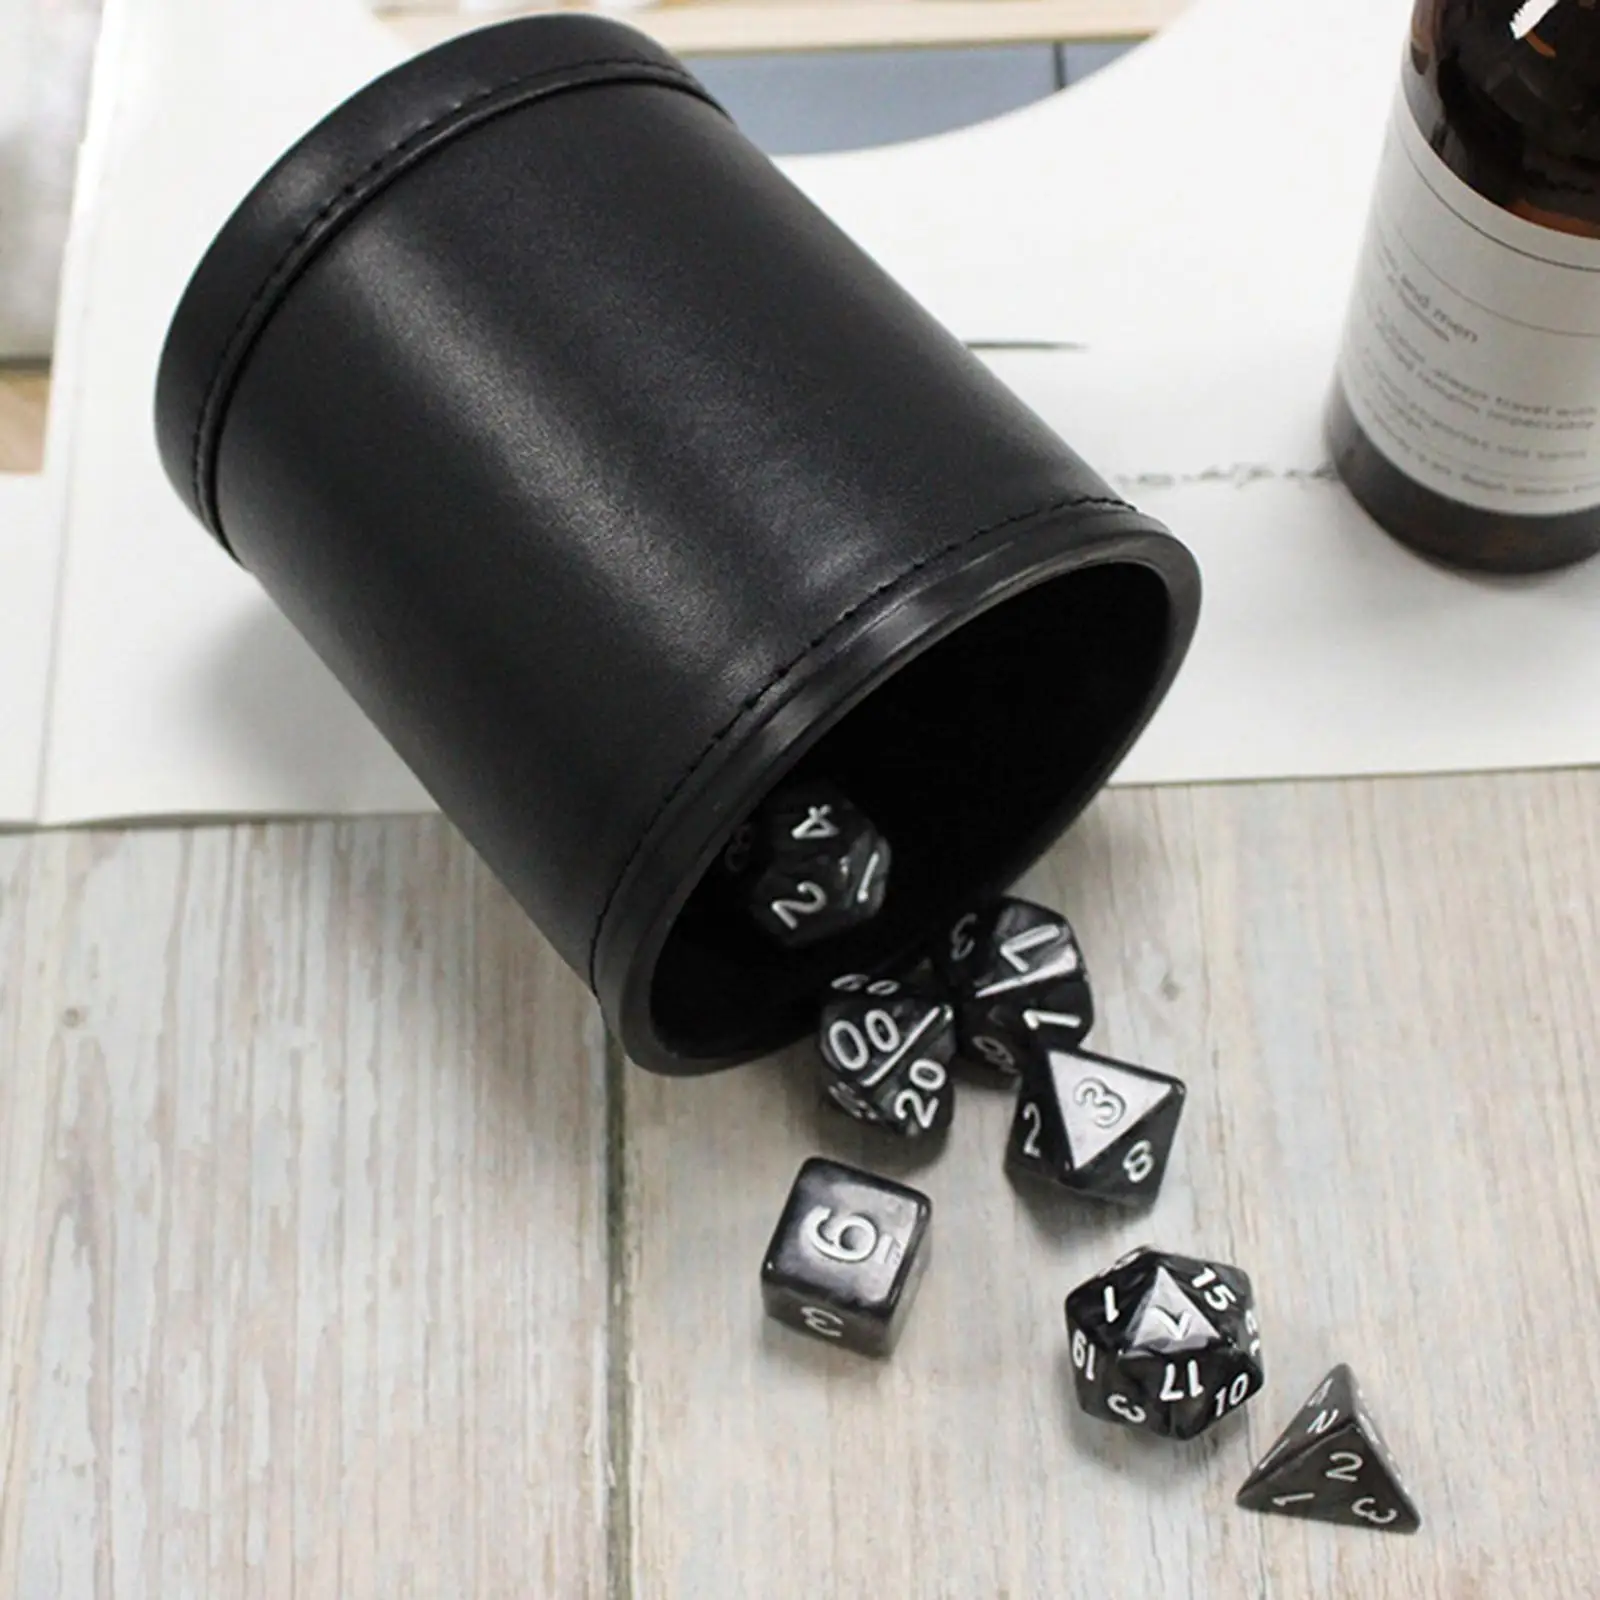 Handheld Dice Cup Dice Game Accessories Entertainment Professional Dice Box Dice Shaker Dice Decider for Club Family Party Home